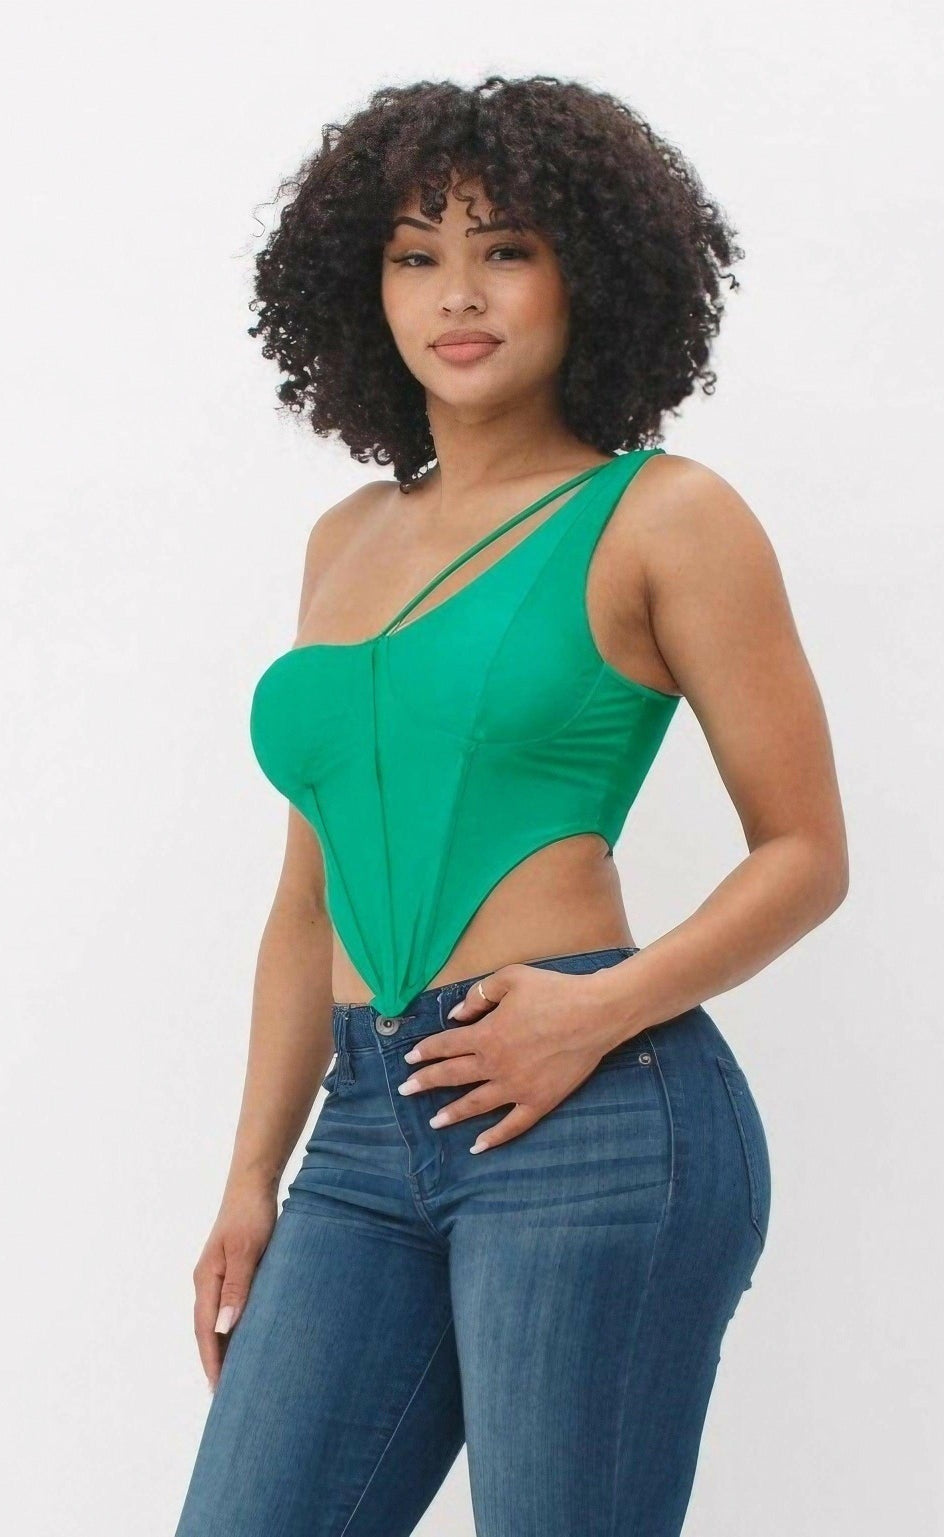 Epicplacess tops Bodice Corset Style One Shoulder Tops